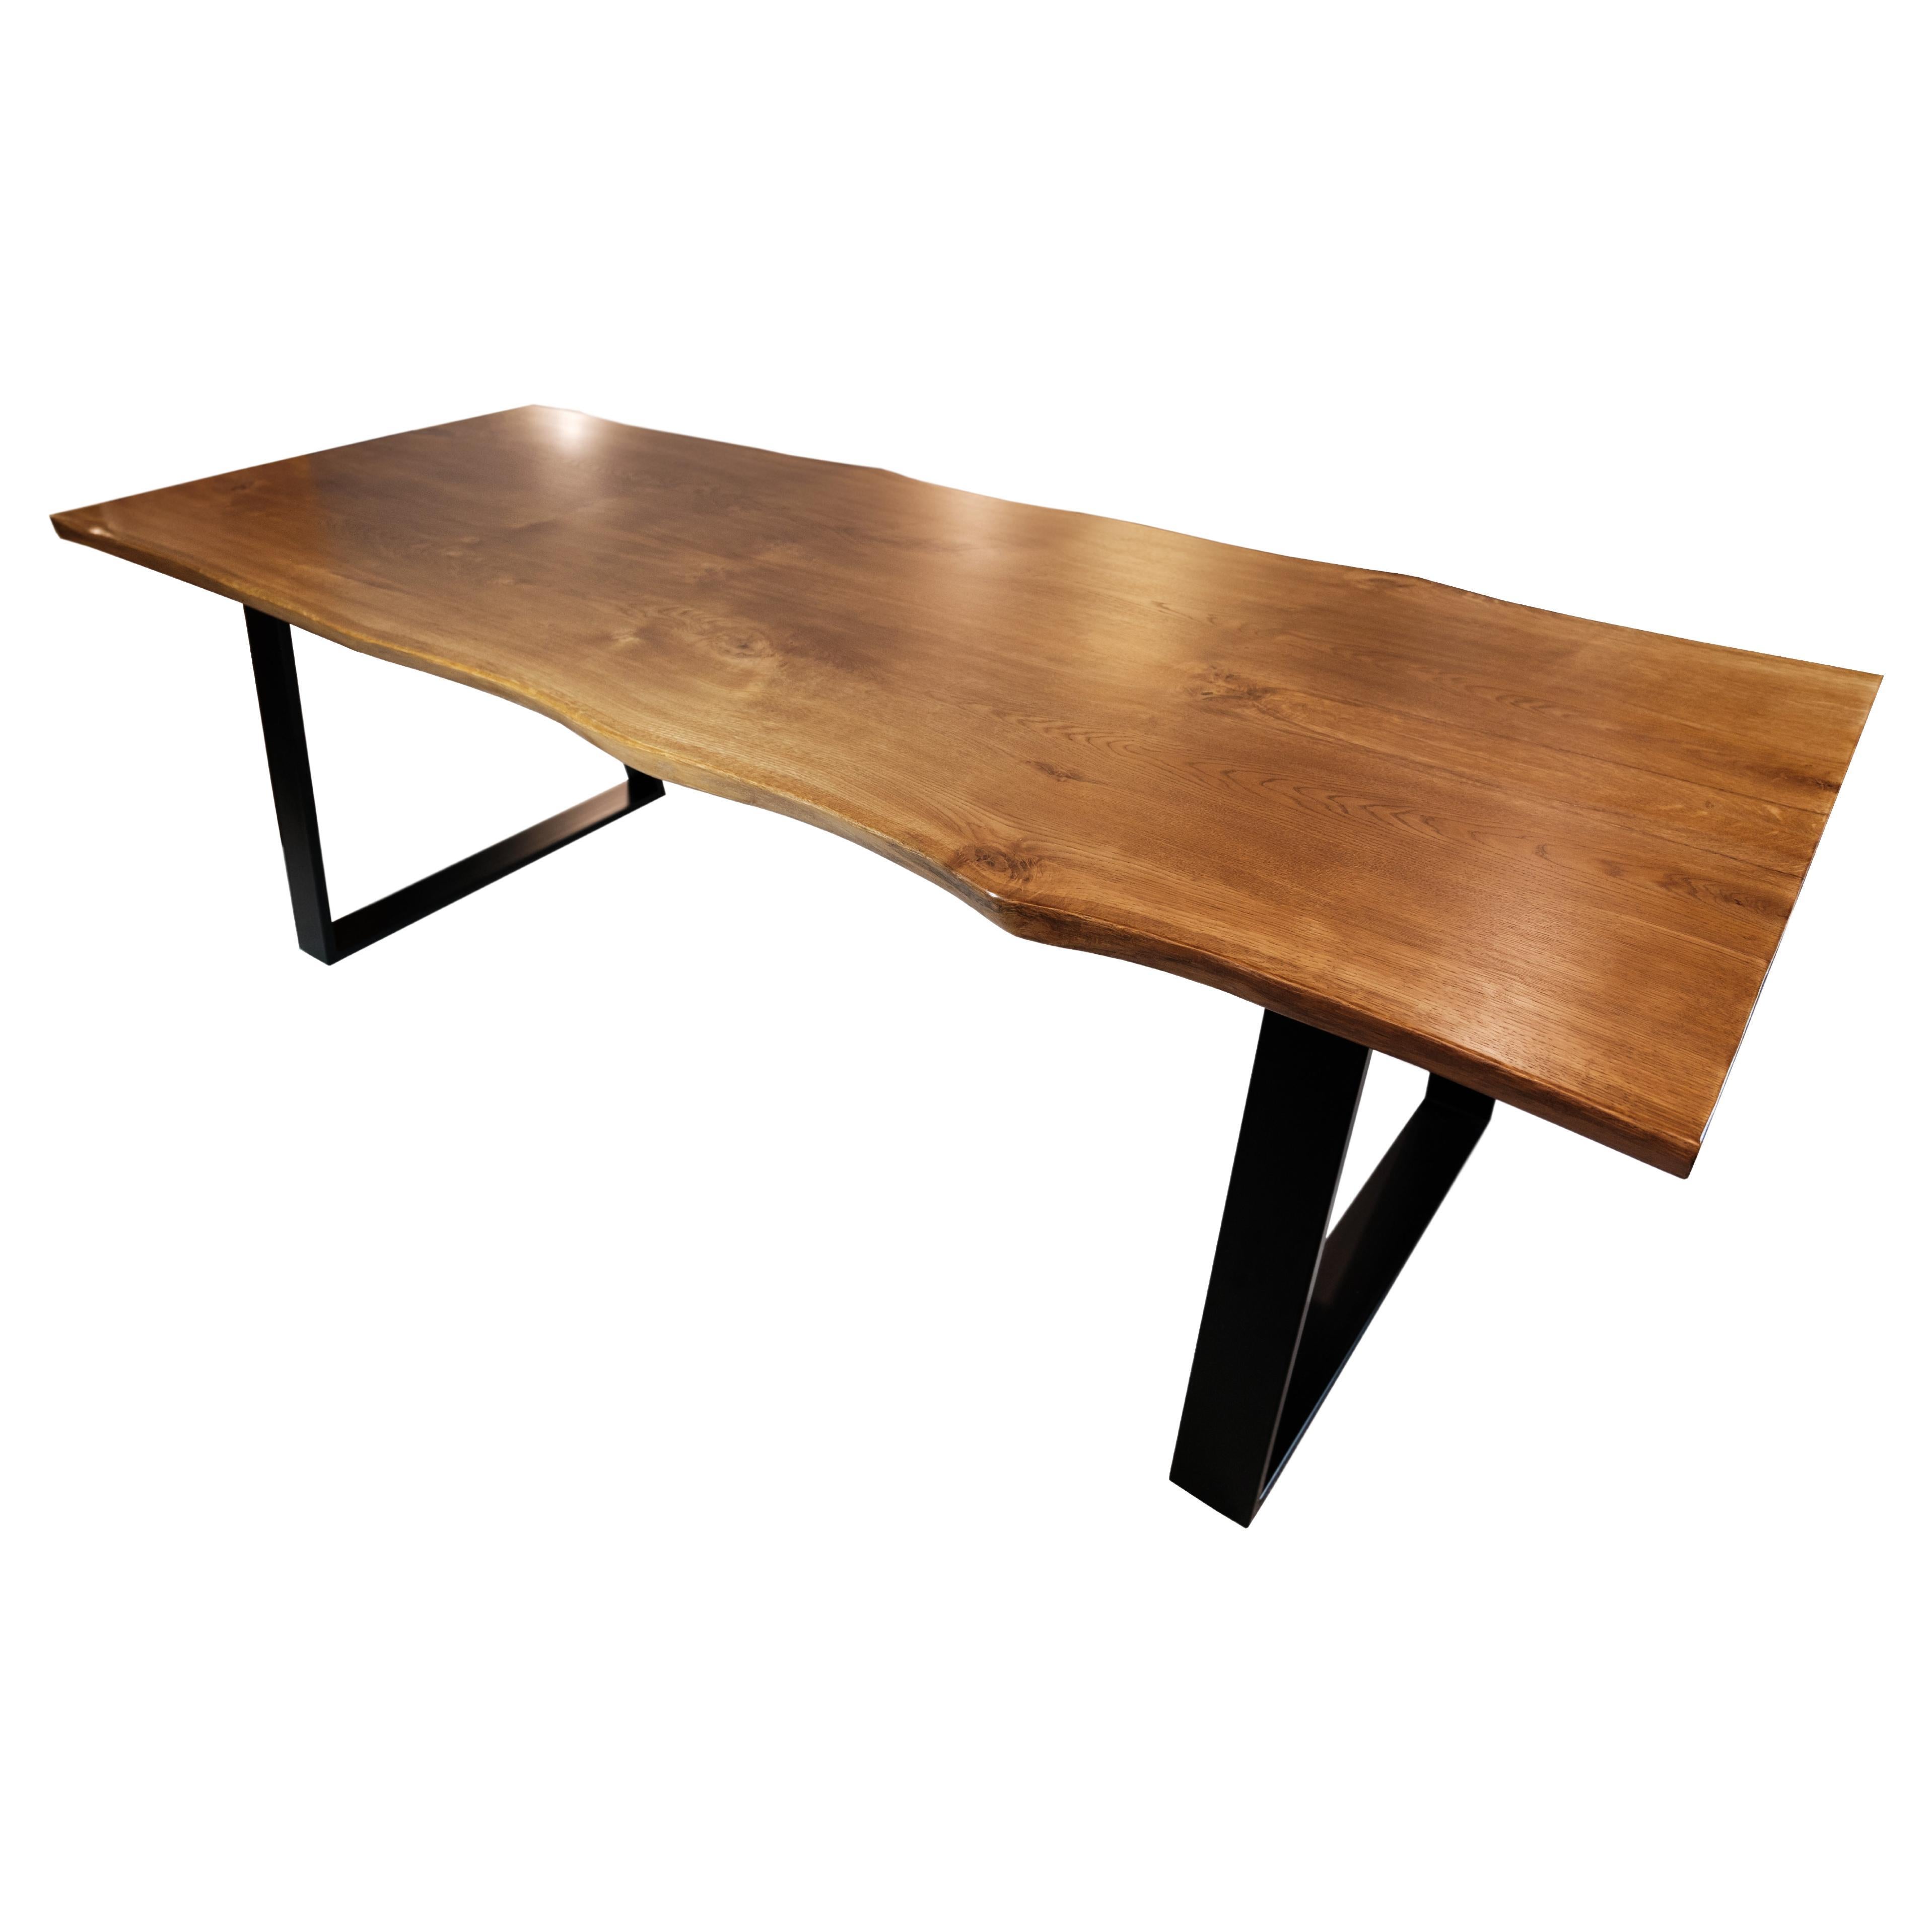 Plank Table Made In Oak With A Black Metal Frame 